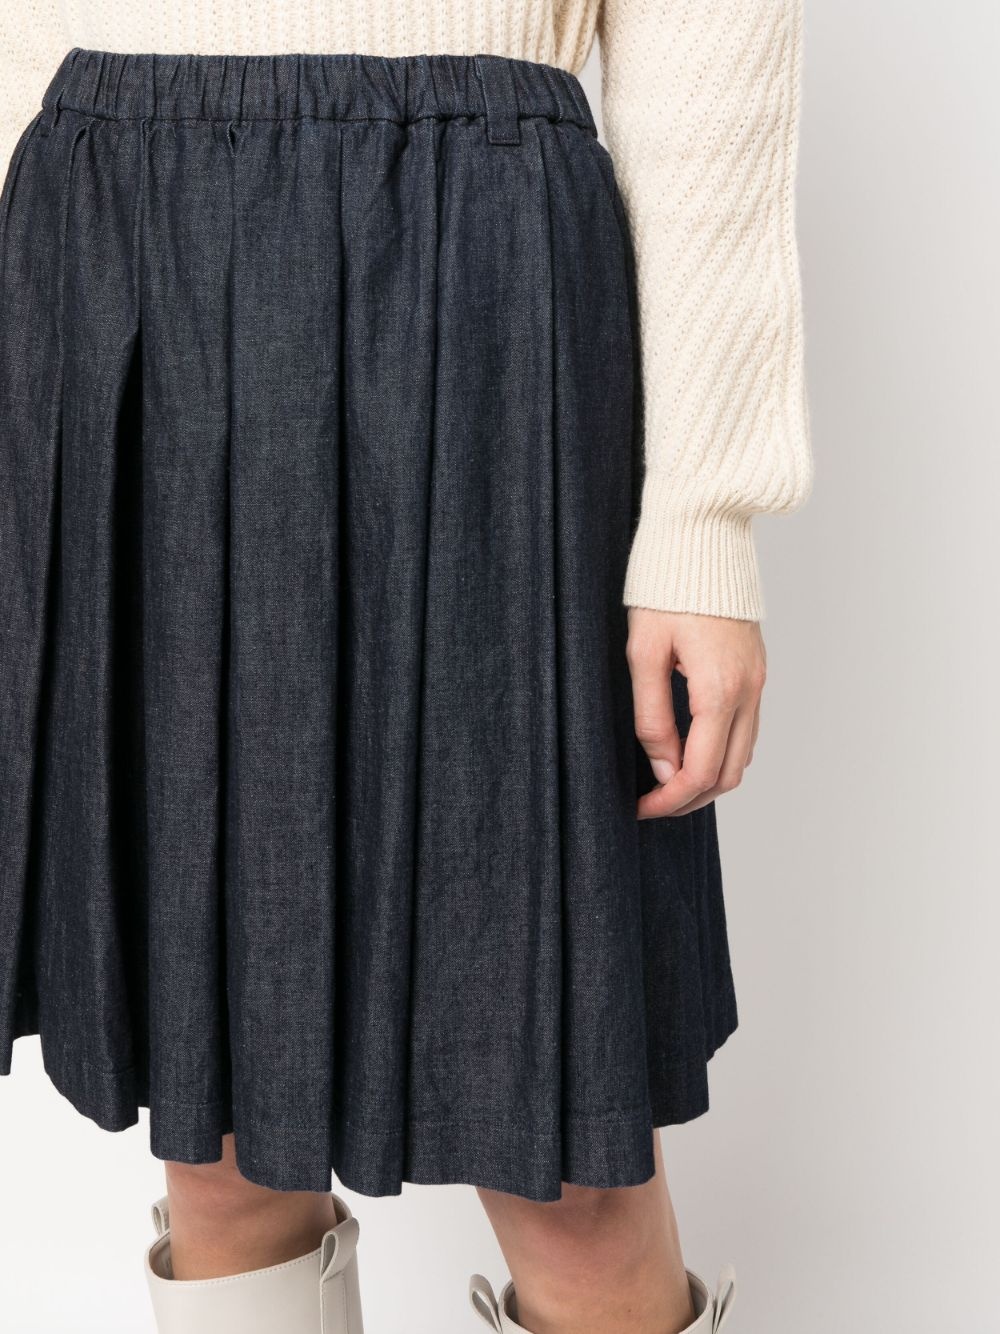 pleated chambray cotton skirt - 5